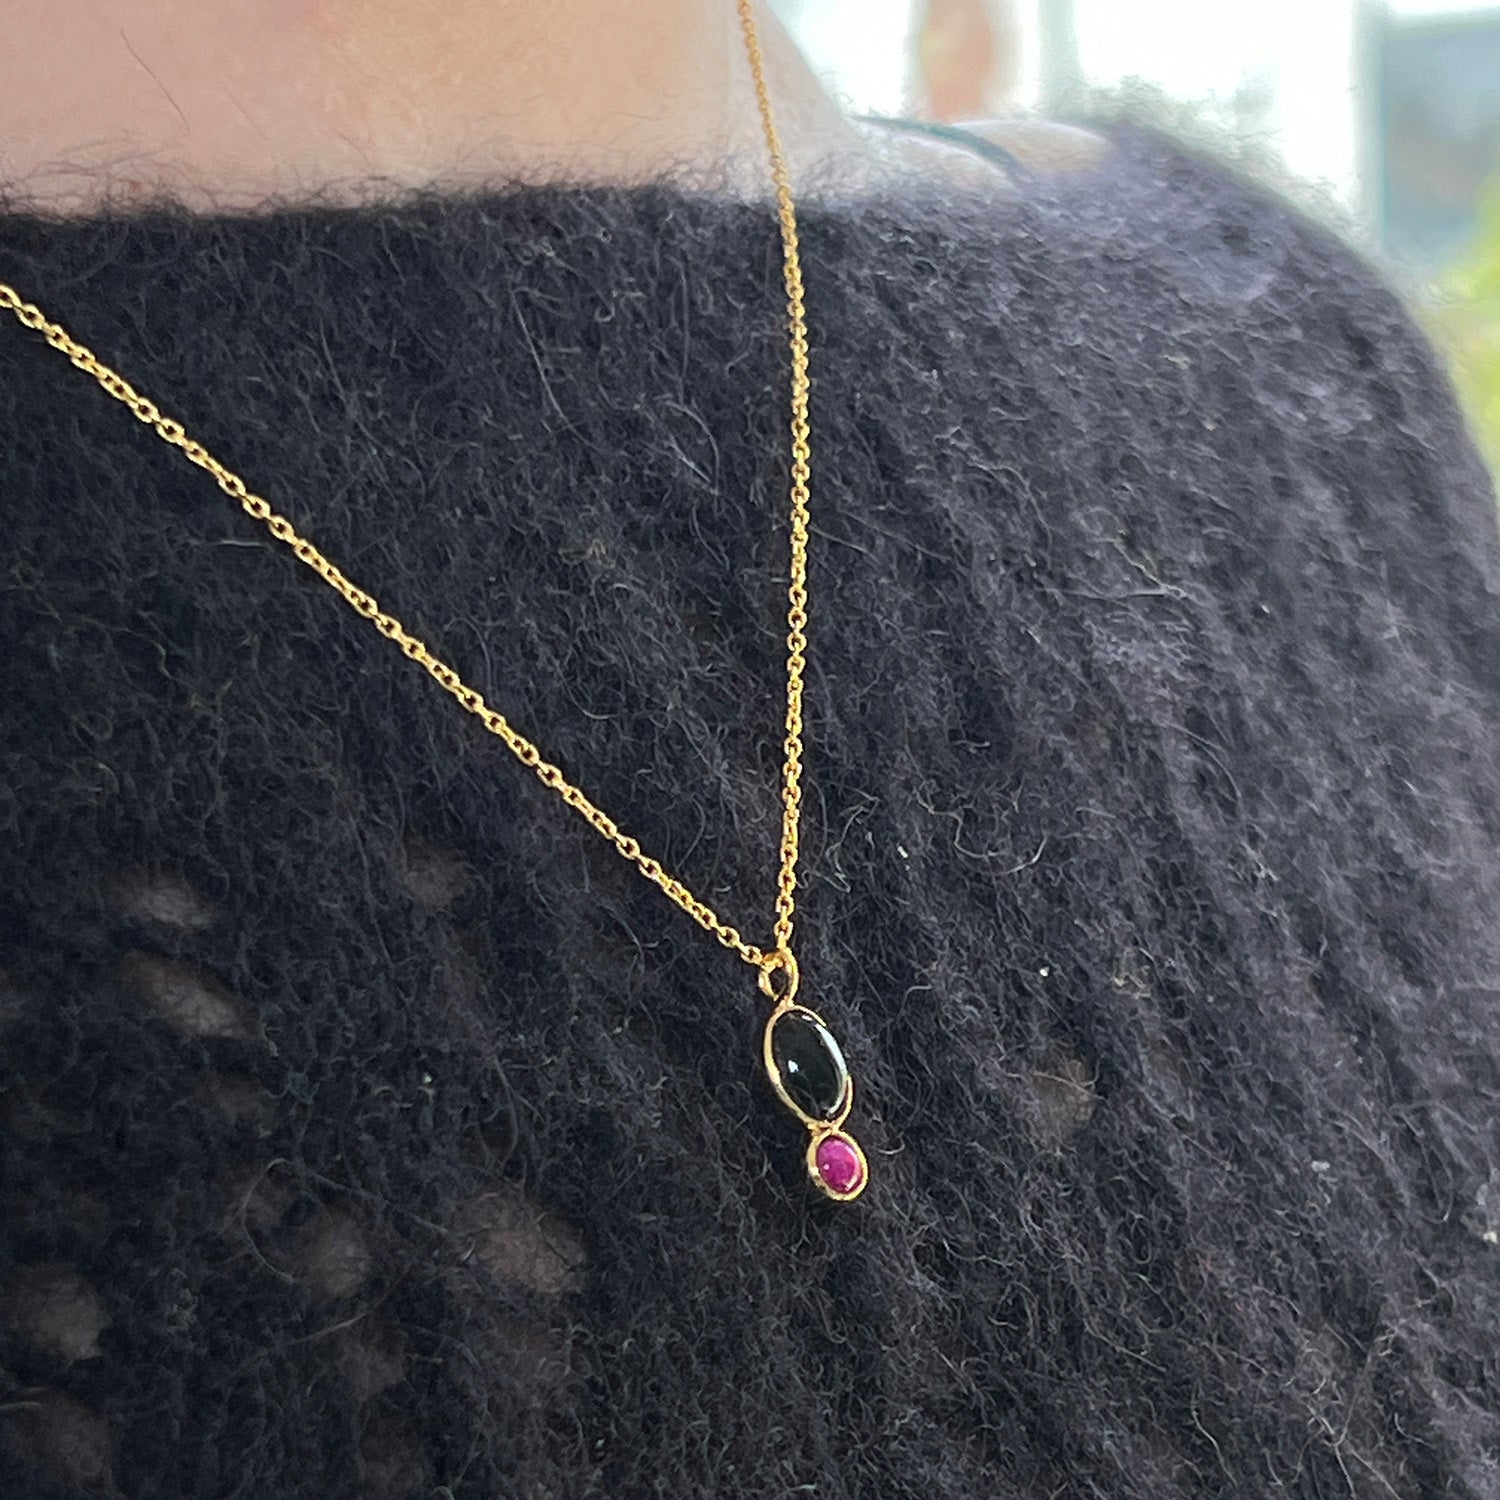 Manis Two Stone Black Onyx & Ruby Pendant On Short Simple Chain